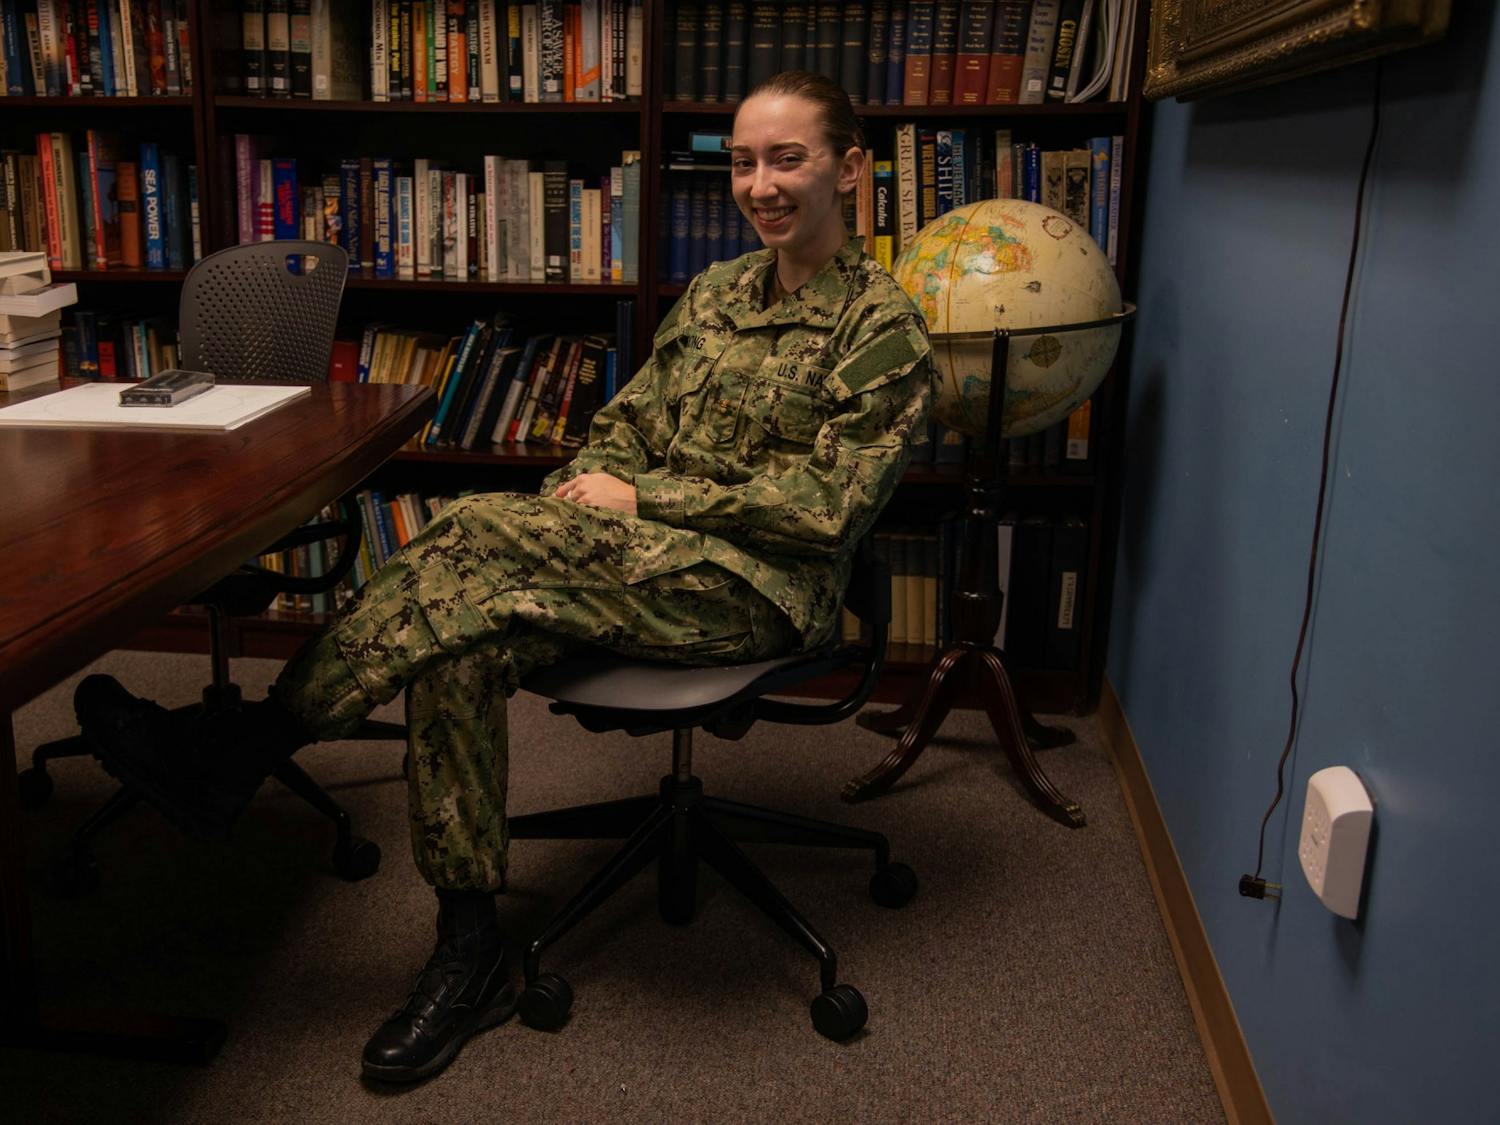 Katy Strong, a senior midshipman at the UNC Naval ROTC, poses for a portrait in the ROTC Armory on Thursday, Oct. 29, 2020. After graduation, Strong will complete her Naval Introductory Flight Evaluation, at the Naval Air Station Pensacola.